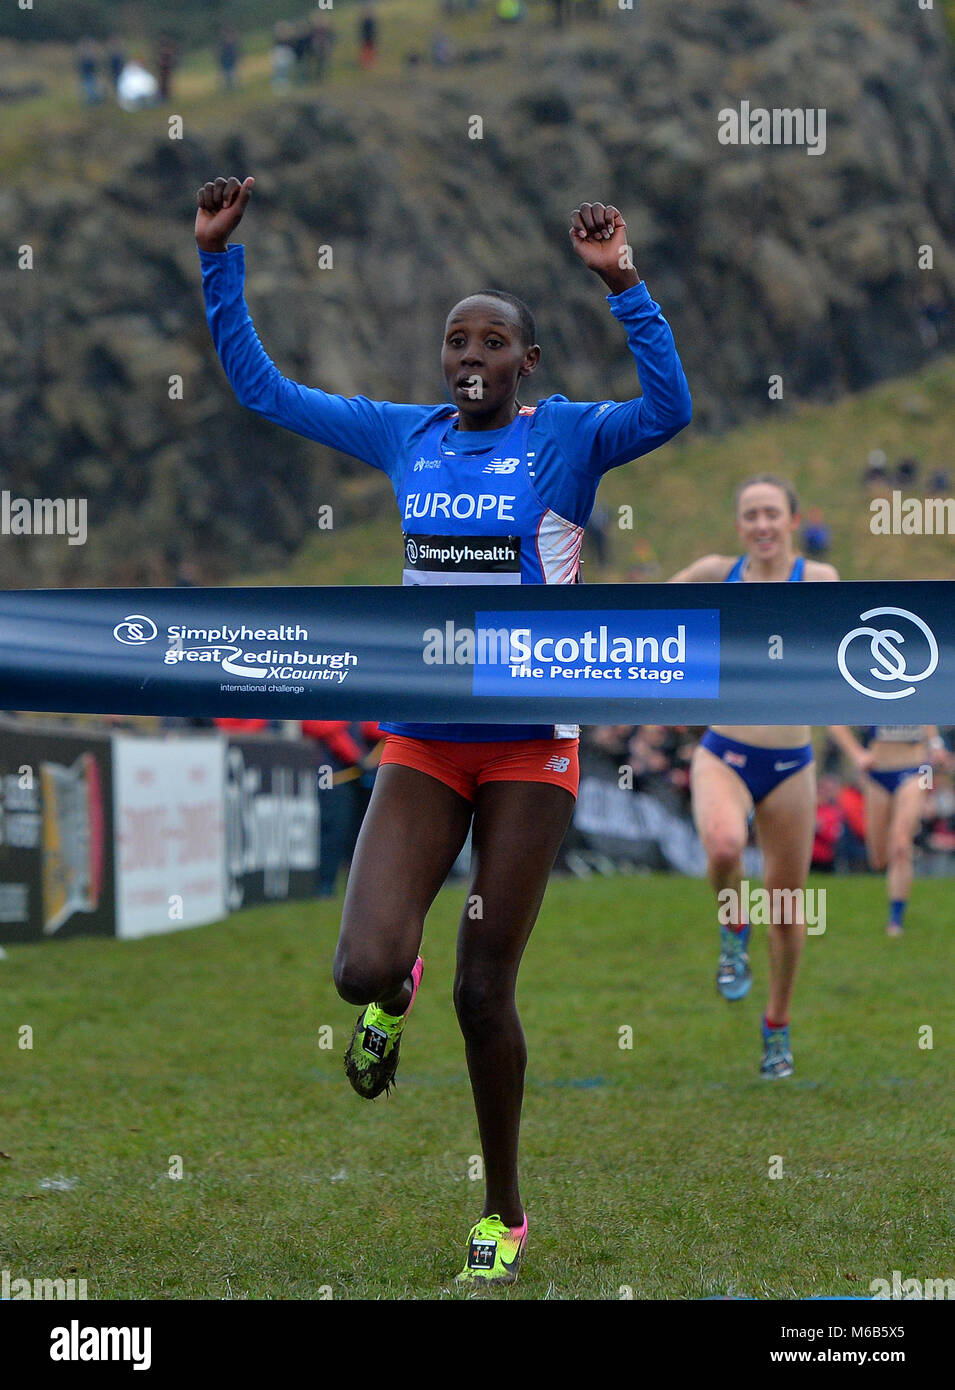 Yasmin Can crosses the finish line to win the Simplyhealth Great Edinburgh XCountry Womans 6k race during the Great Edinburgh International XCountry 2018 in Holyrood Park, Edinburgh. PRESS ASSOCIATION Photo. Picture date: Saturday January 13, 2018. Photo credit should read: Mark Runnacles/PA Wire. Stock Photo